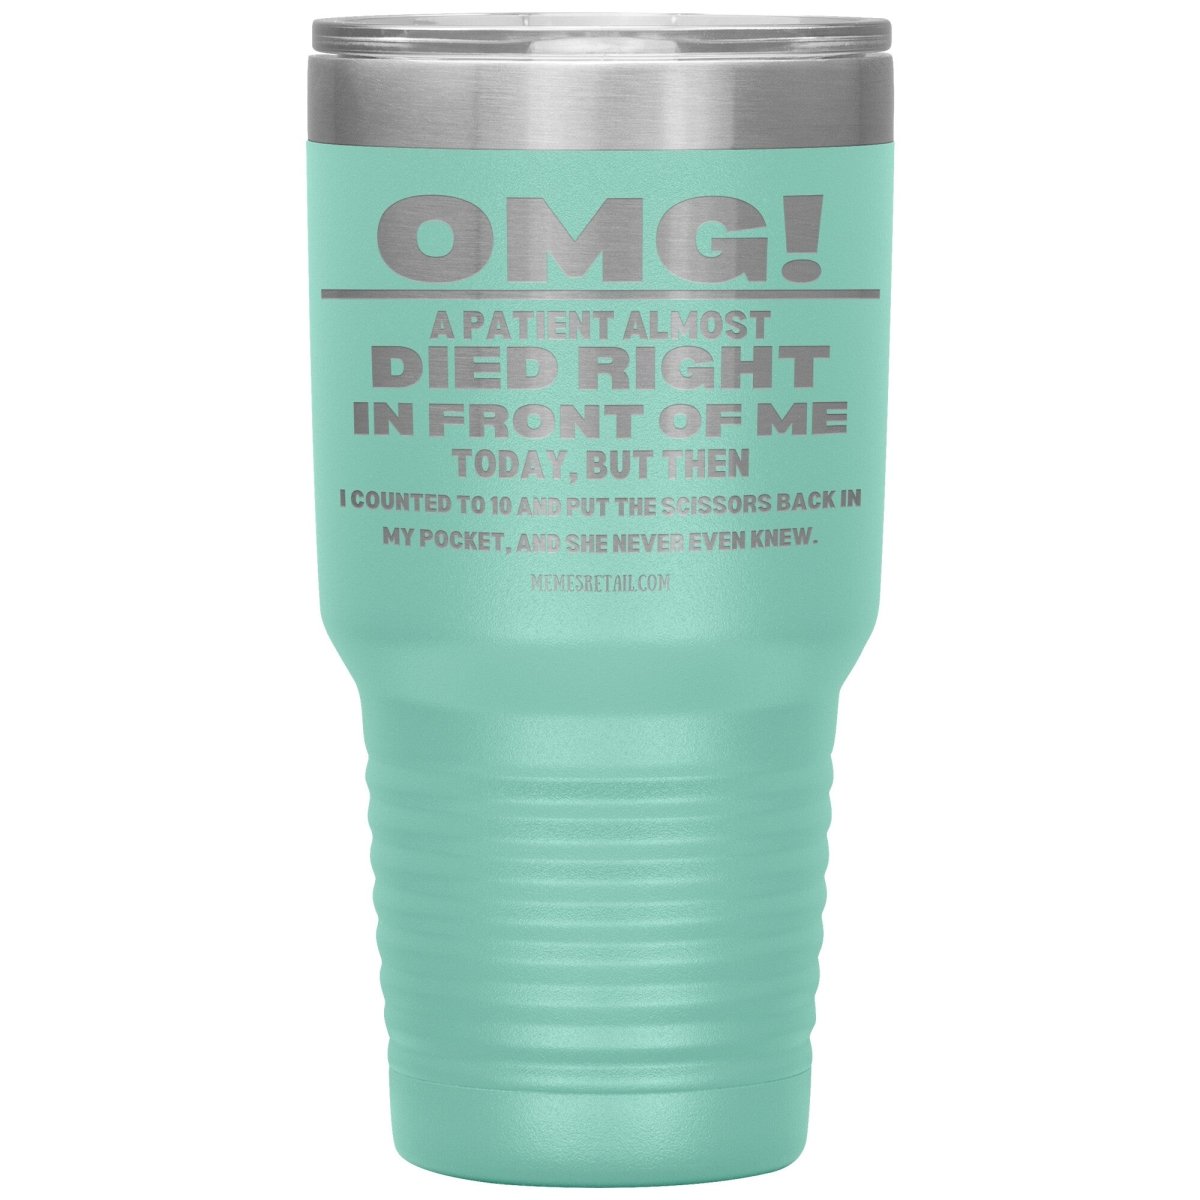 OMG! A Patient Almost Died Today Tumblers, 30oz Insulated Tumbler / Teal - MemesRetail.com